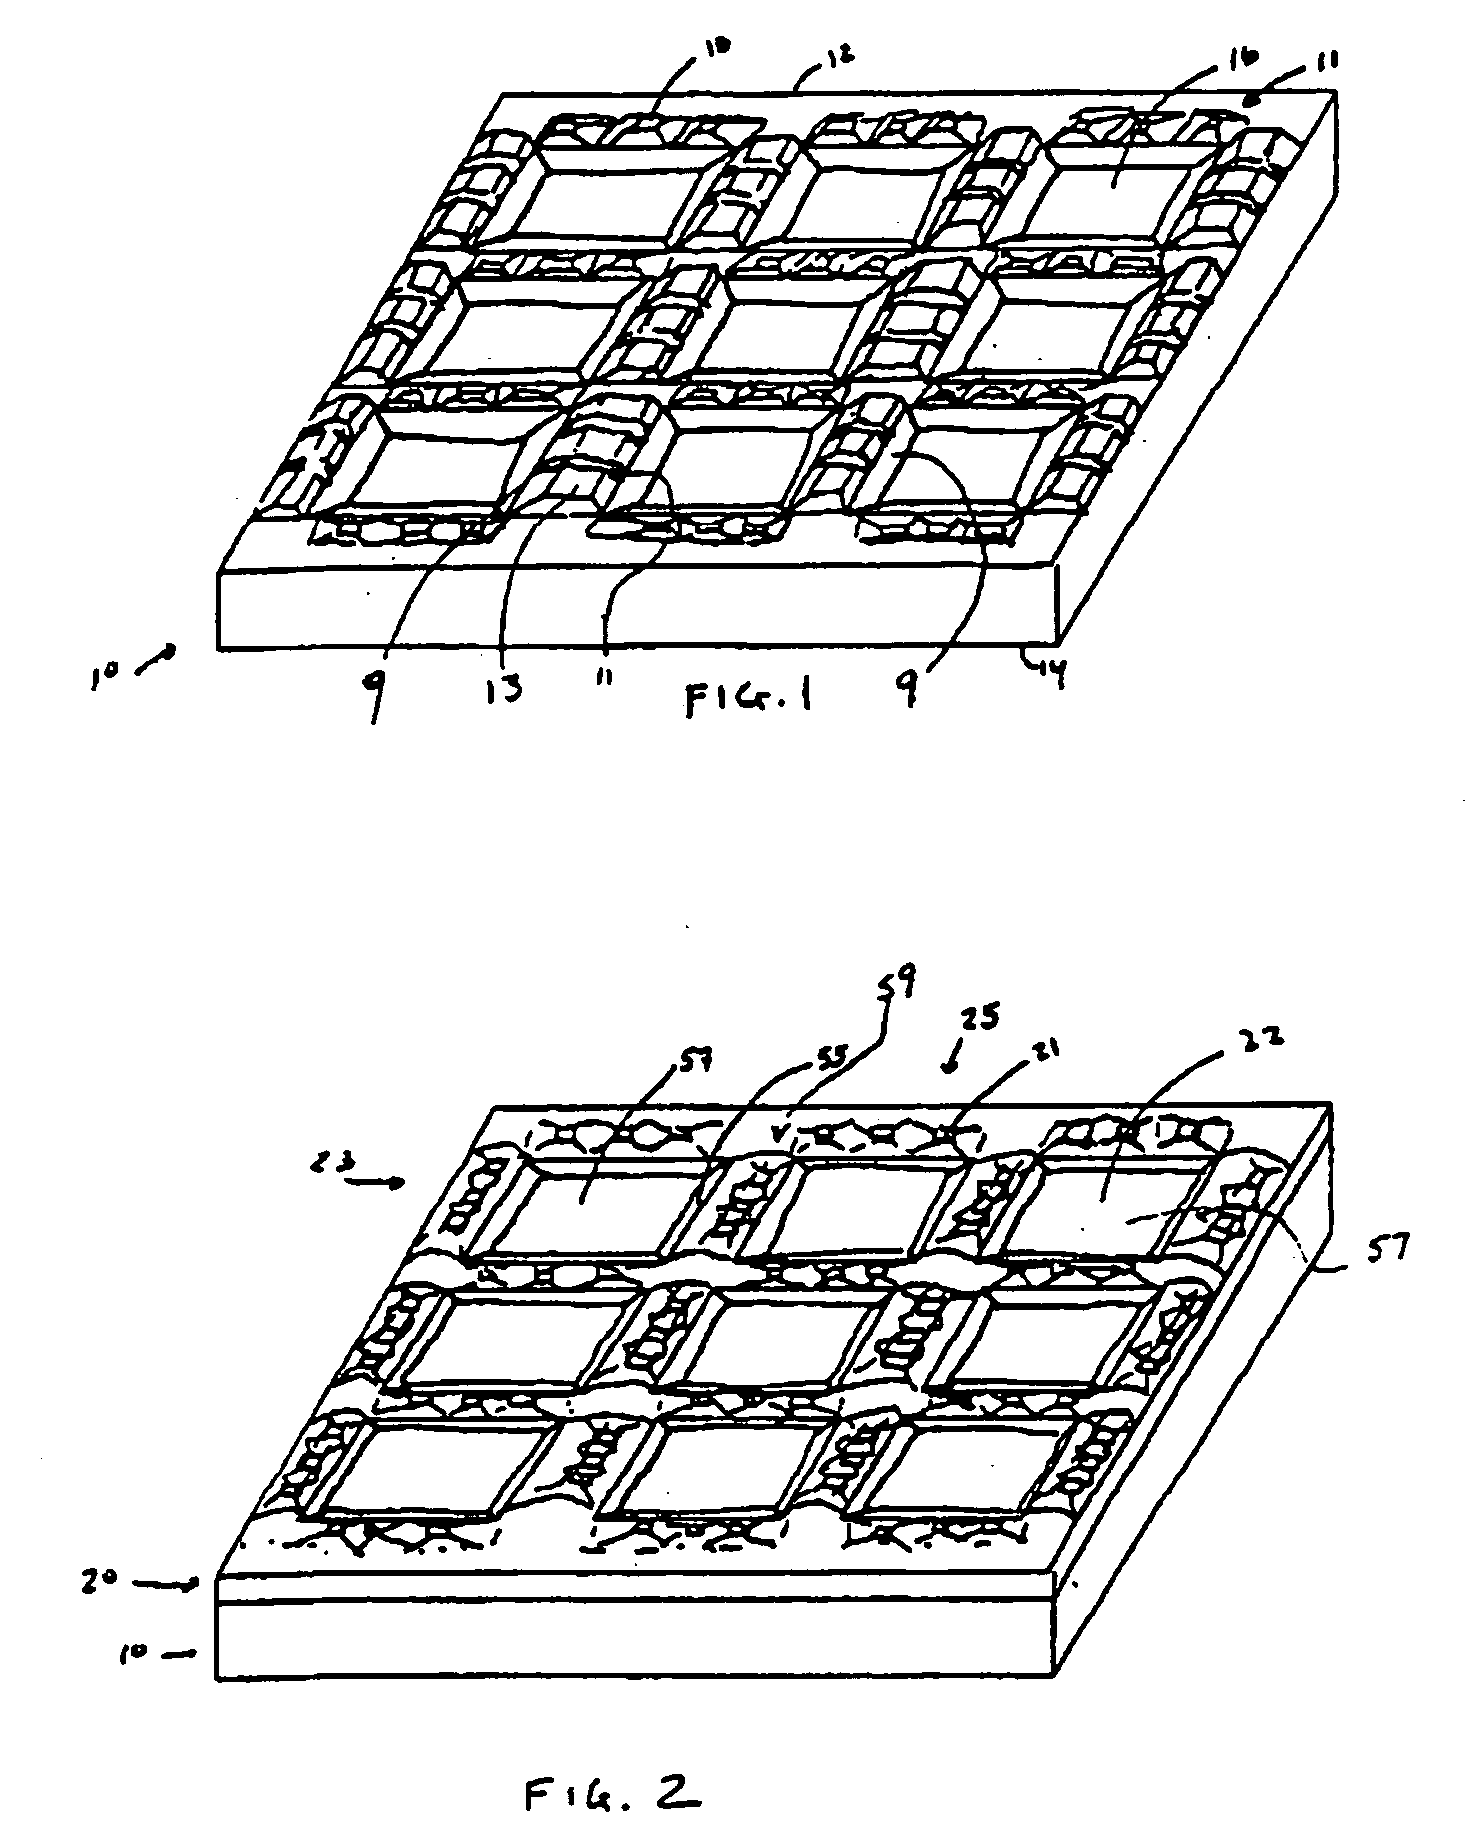 Method of making microelectronic packages including electrically and/or thermally conductive element